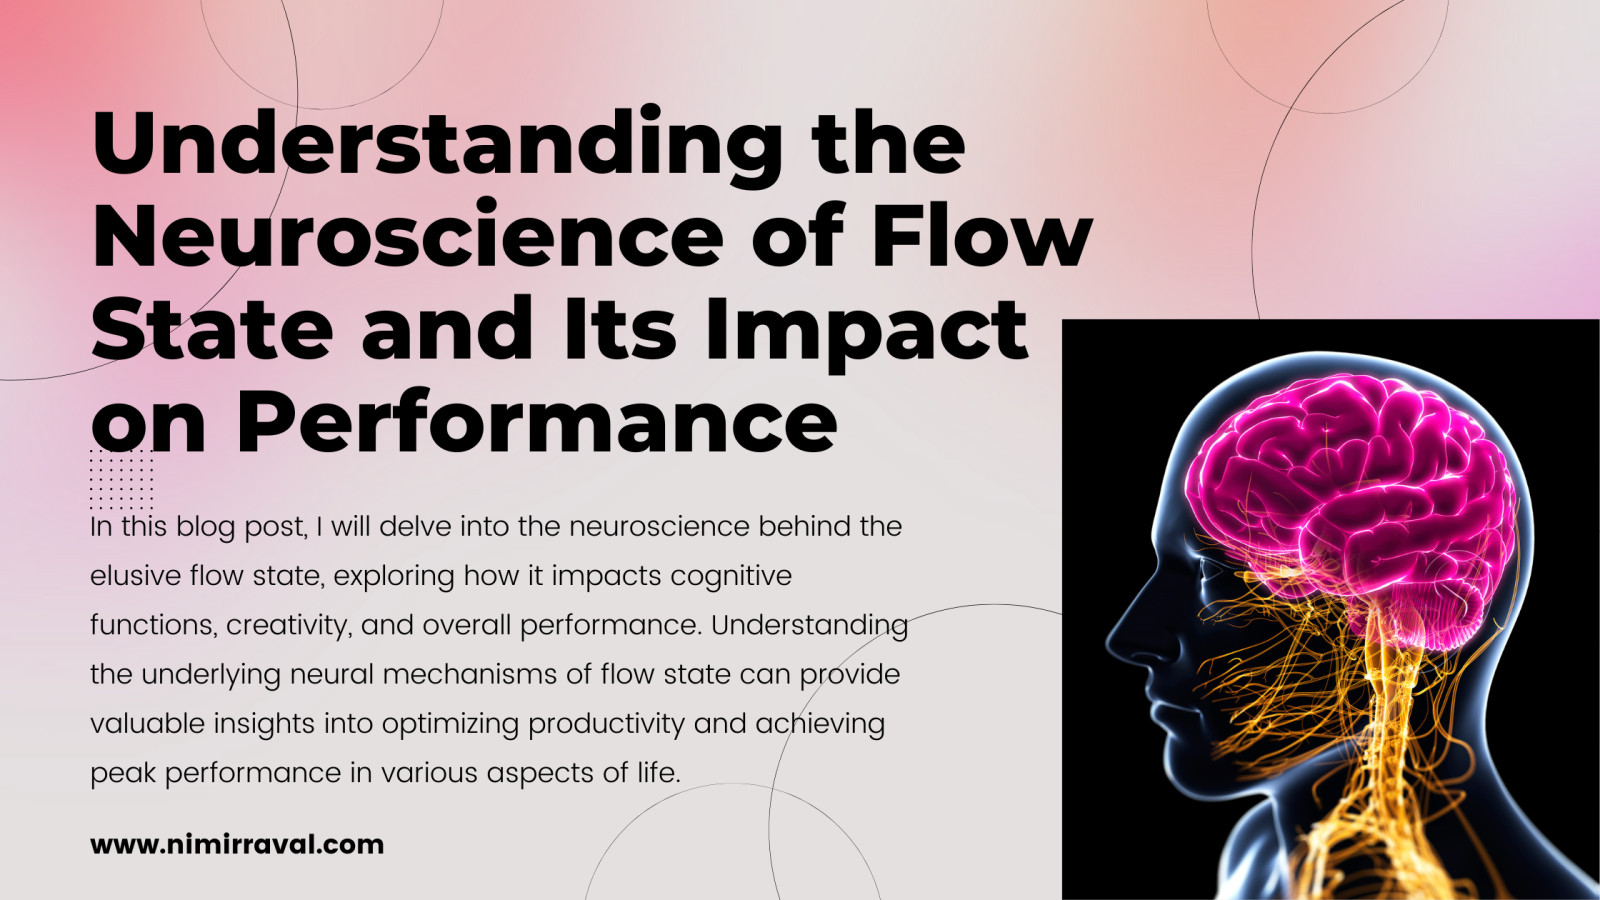 Understanding the Neuroscience of Flow State and its Impact on Performance